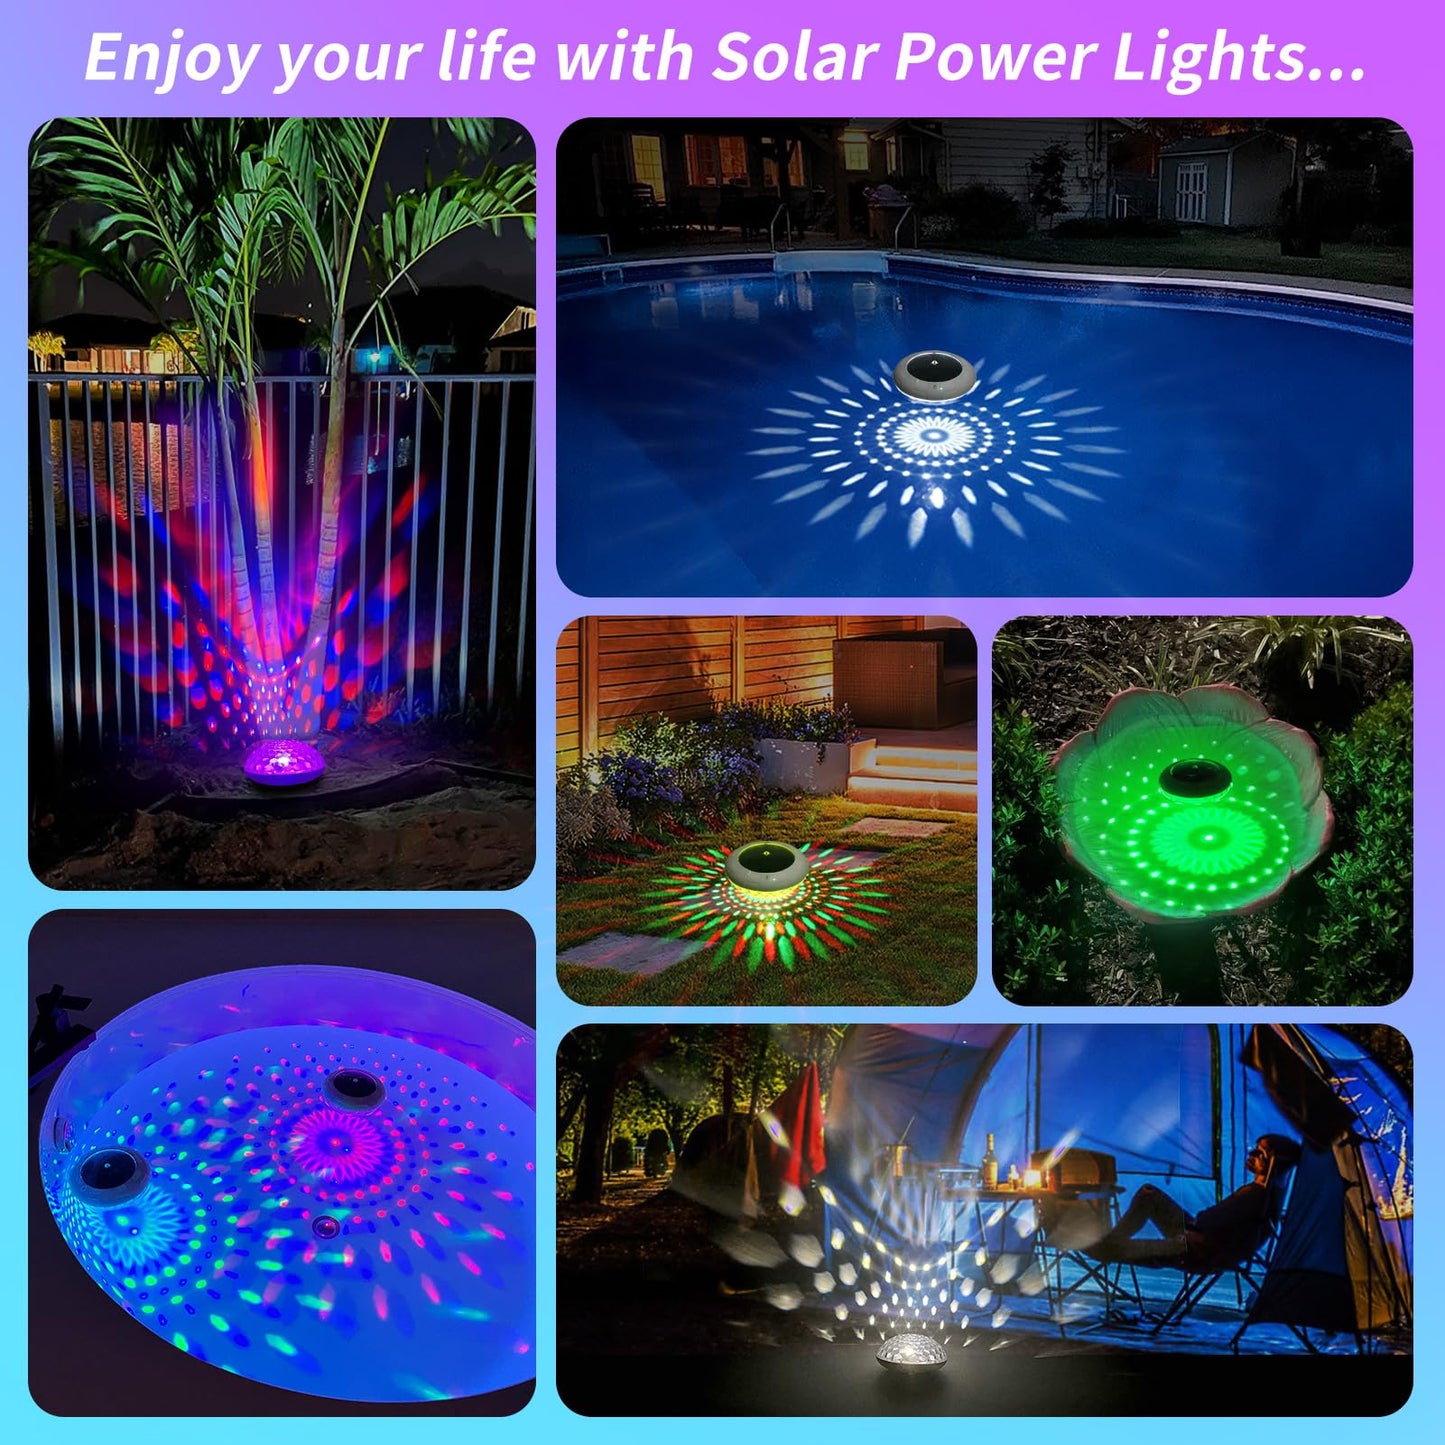 LENONE Floating Pool Lights with APP, 6.5 Inch Dynamic RGB Color Changing Solar Pool Lights That Float, IP68 Waterproof Dimmable Hangable Solar Floating Lights for Pool, Garden, Weeding Decor-2PCS